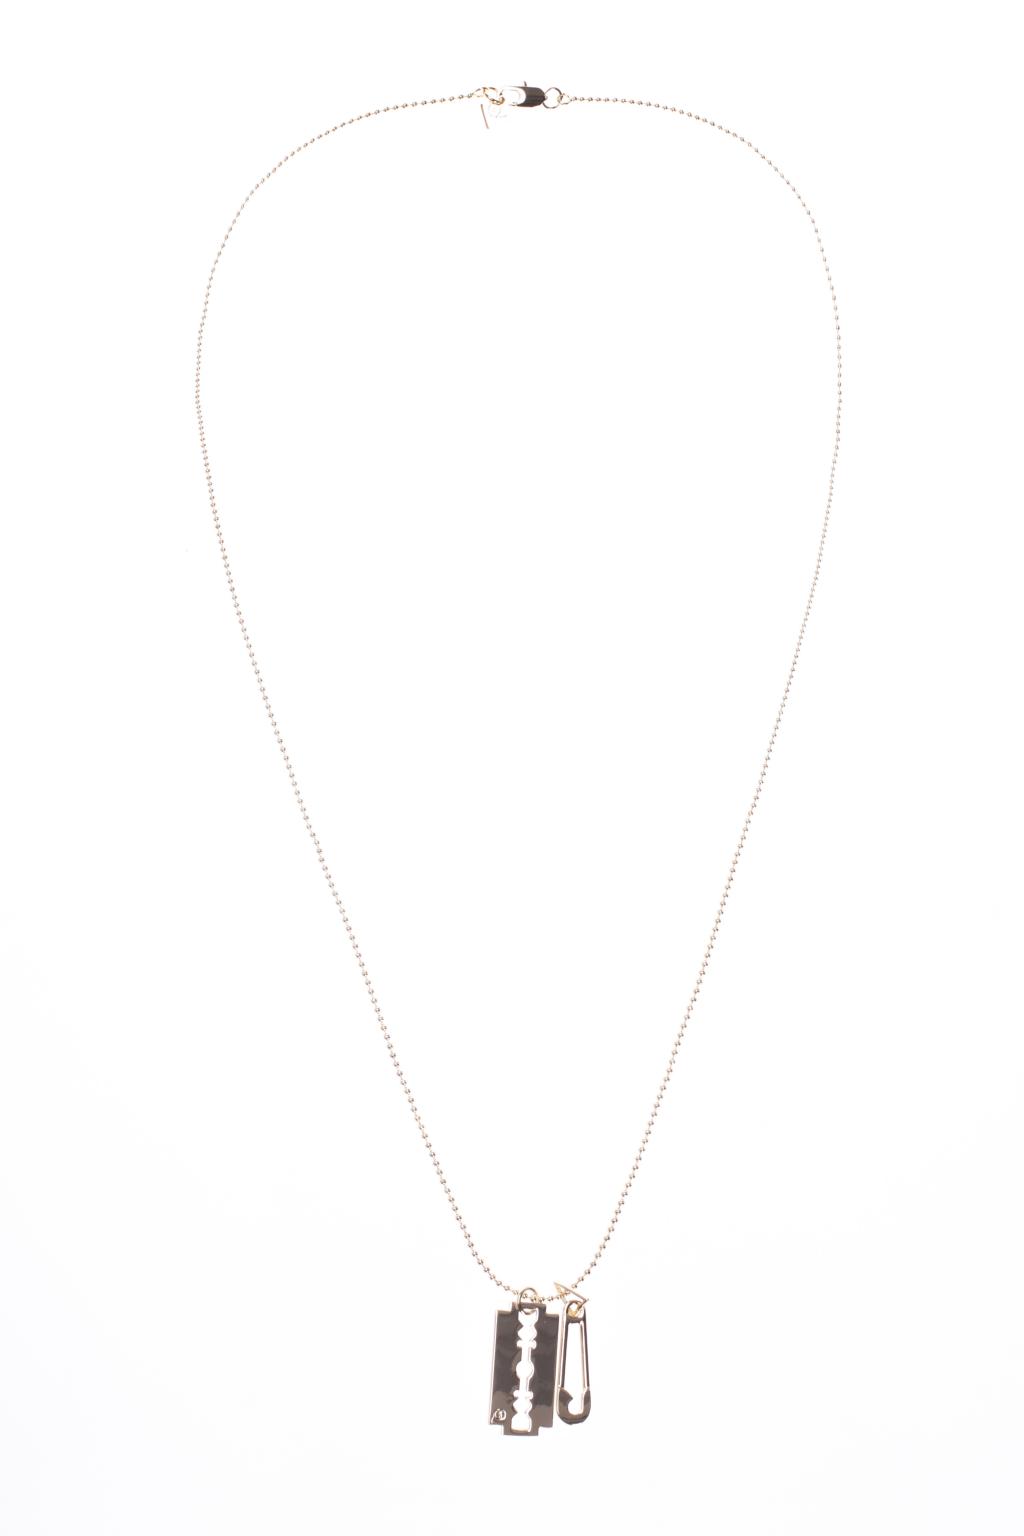 McQ by Alexander McQueen, Jewelry, Mcq Alexander Mcqueen Gold Tone Razor  Blade And Safety Pin Pendant Necklace